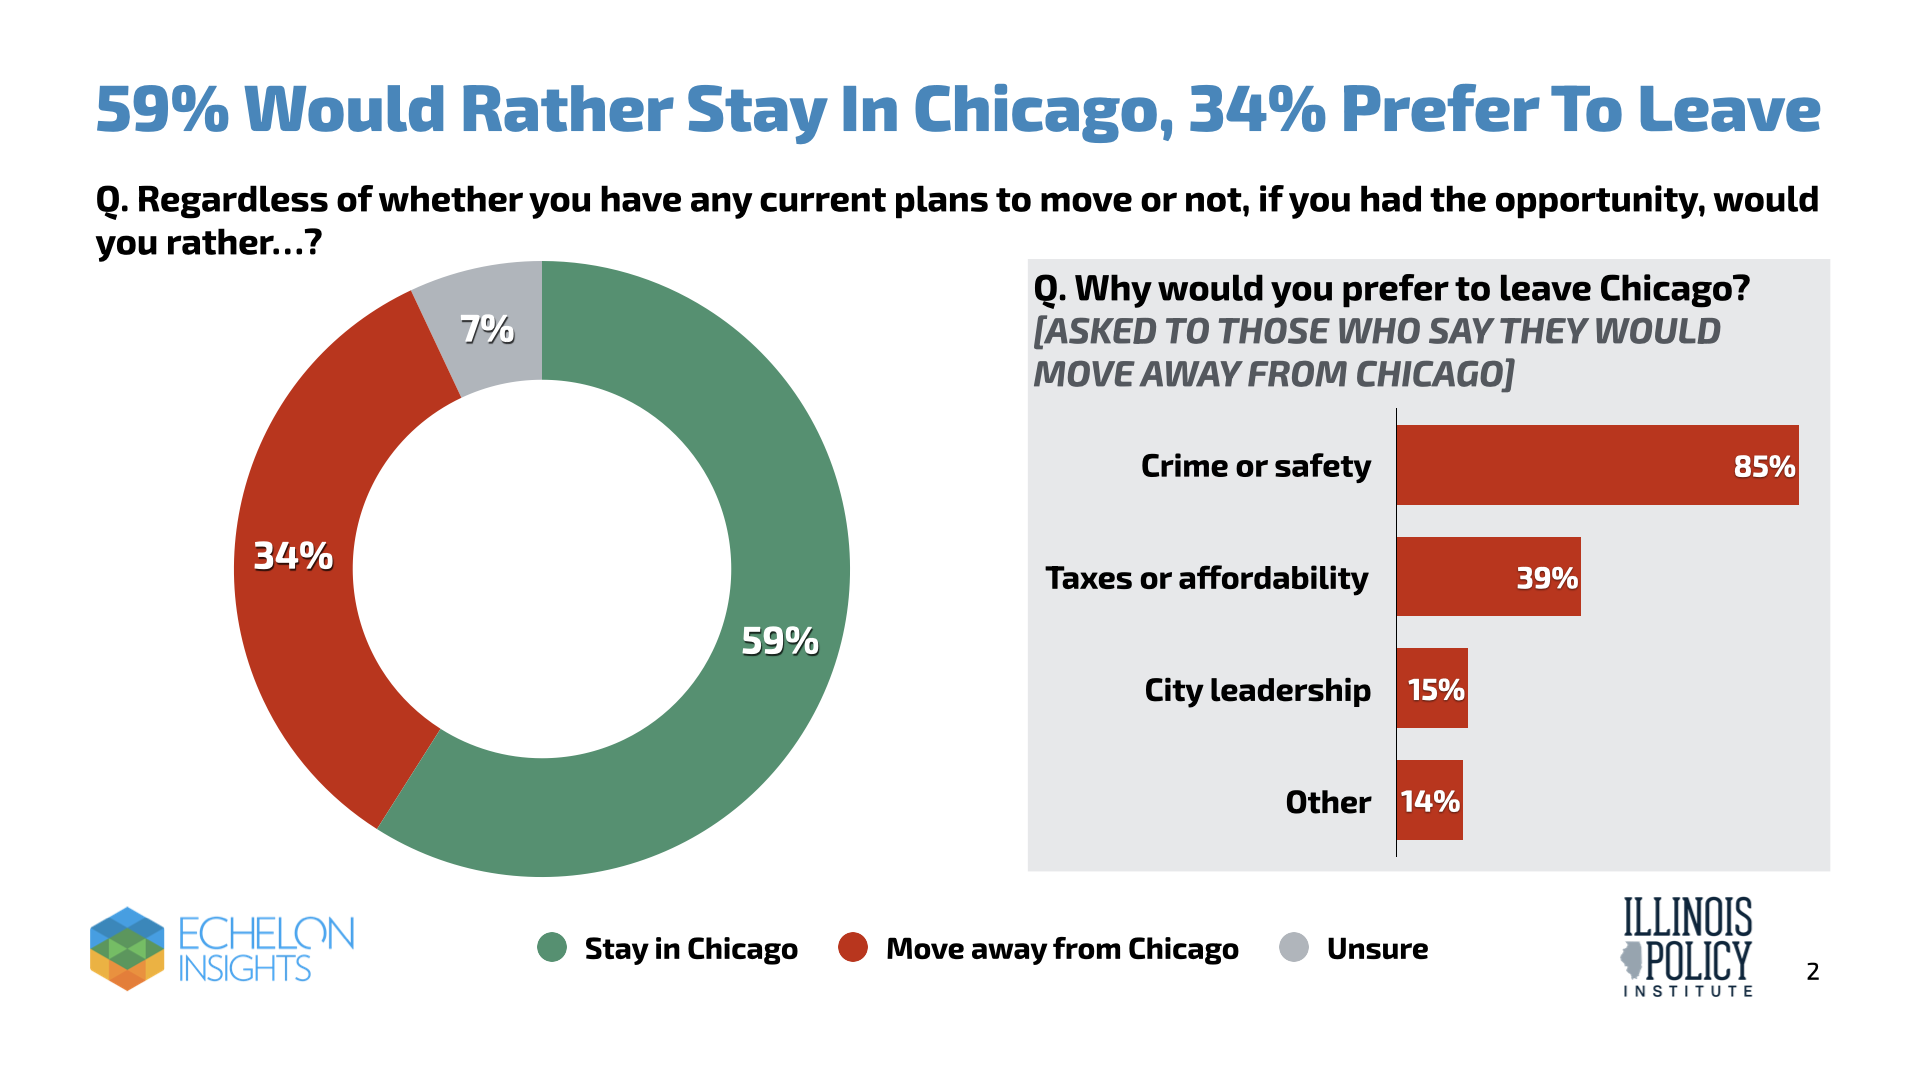 59% would rather stay in Chicago, 34% prefer to leave